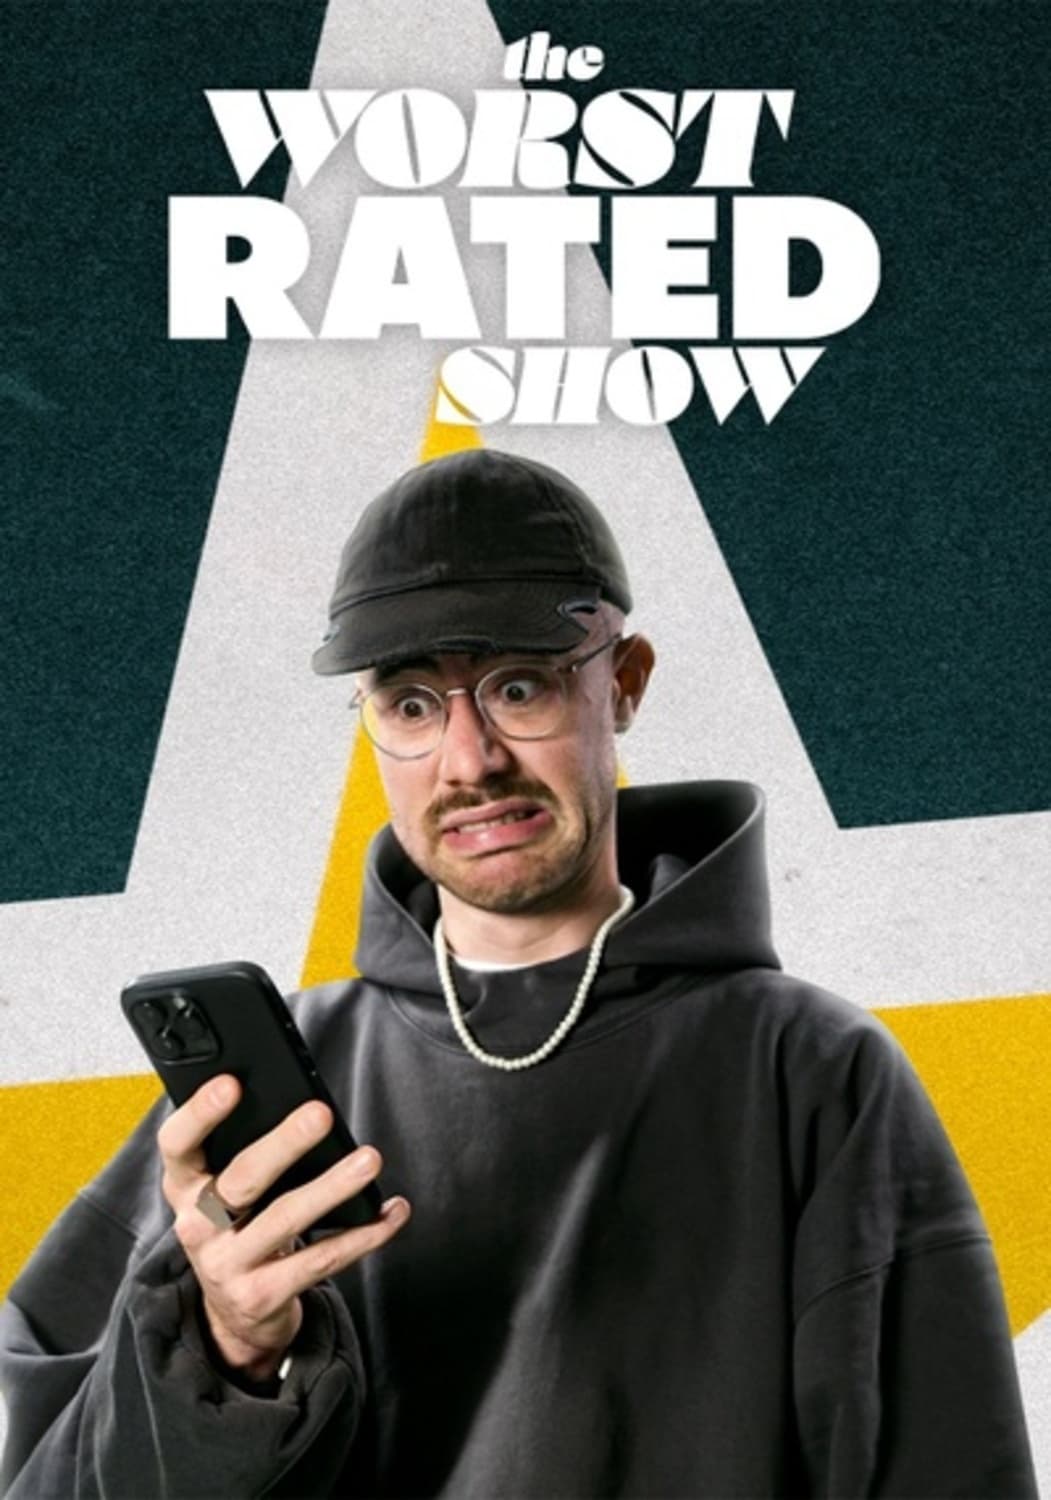 The Worst Rated Show!